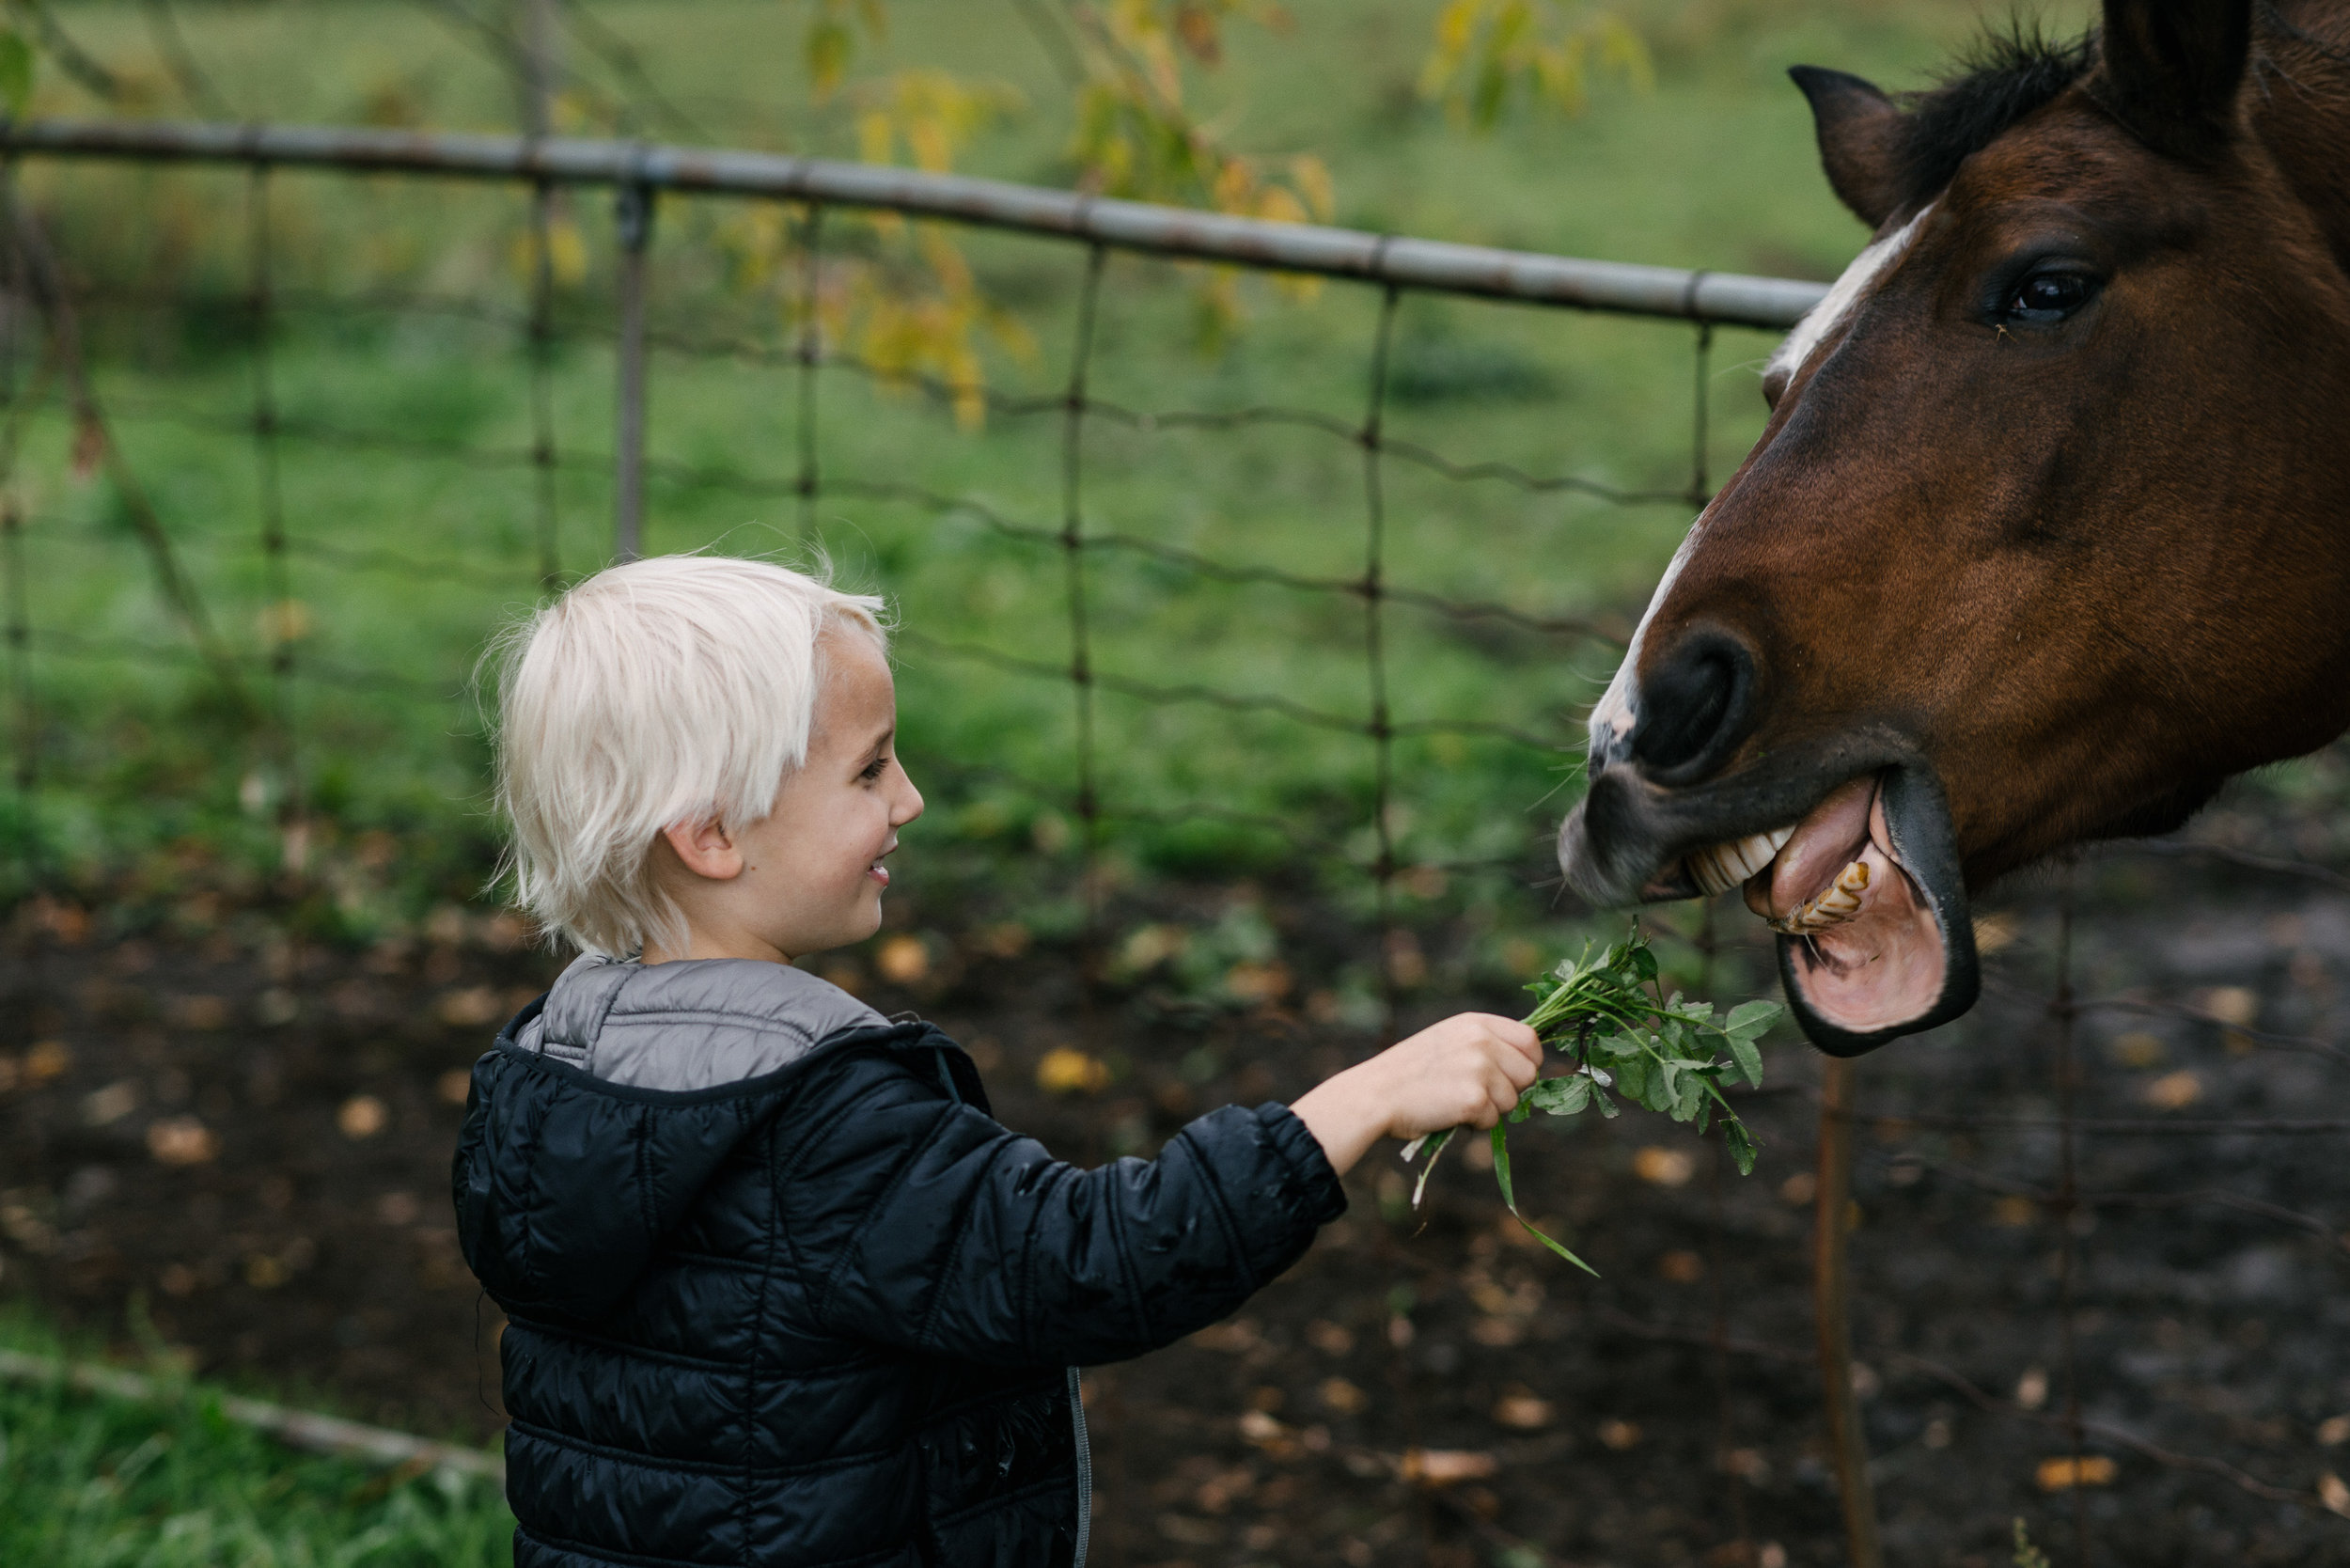 he hugged a horse, he fed another horse, and then when the horse